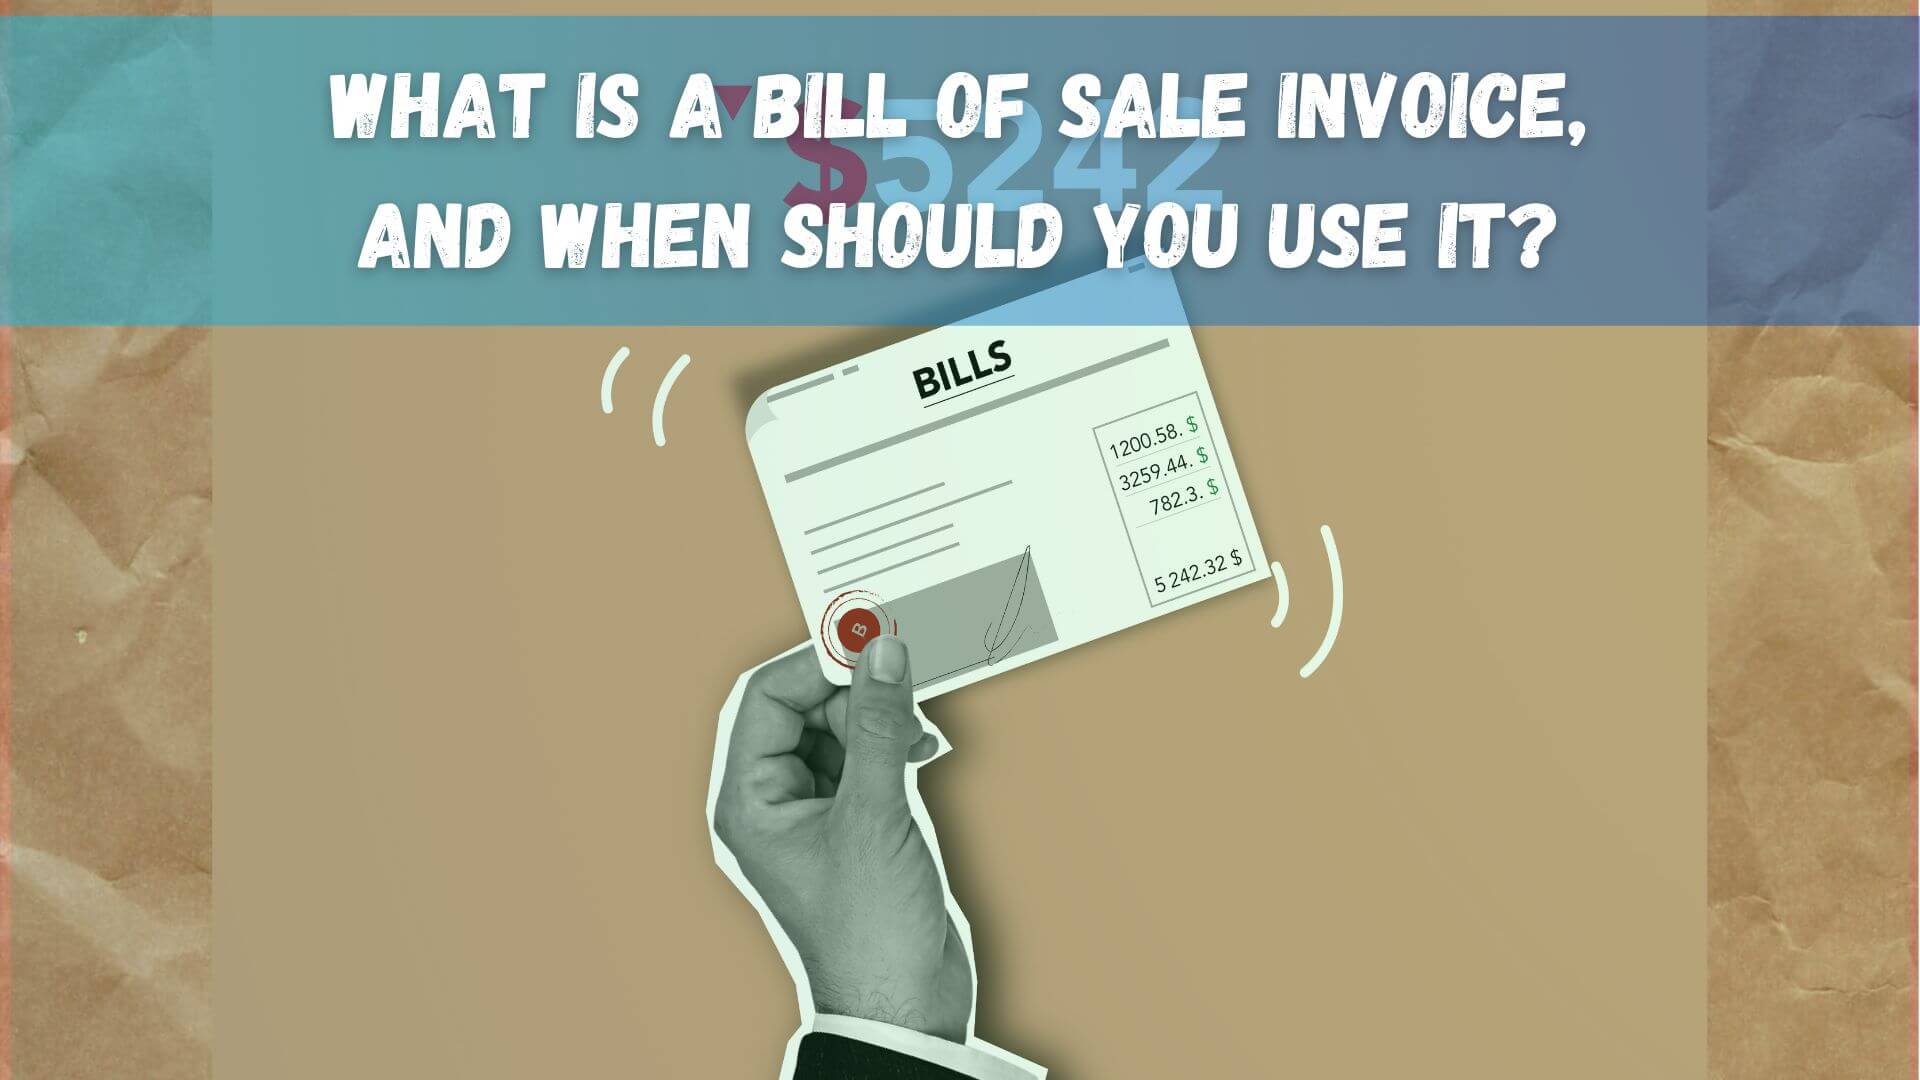 Bill of sale invoice helps protect both the buyer and seller if transaction goes wrong. Here's how and when to use it.